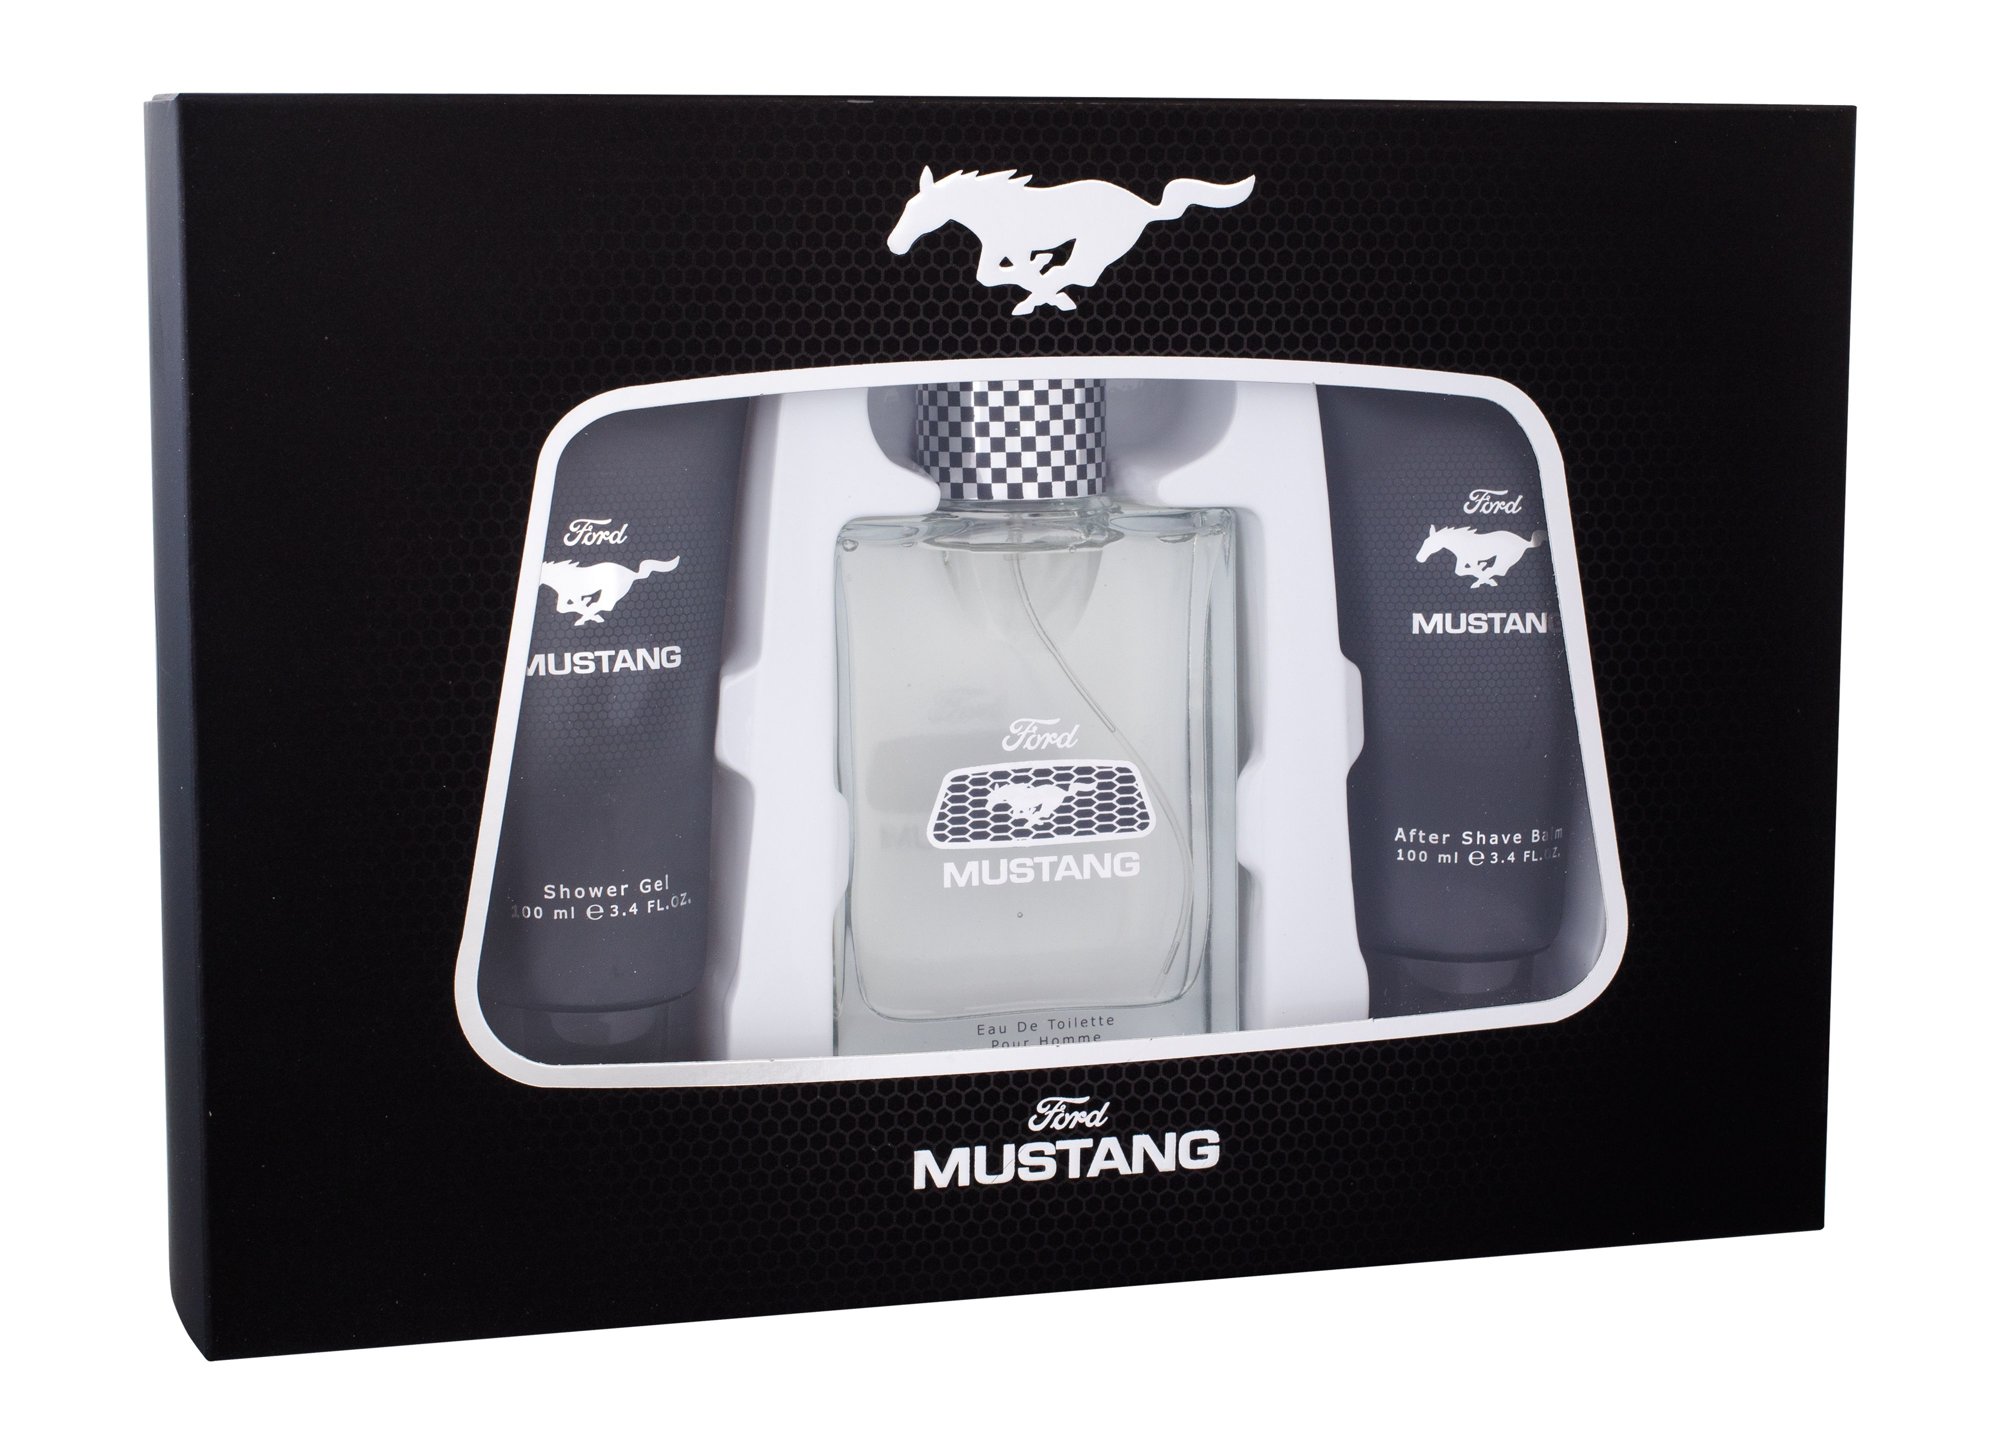 Ford Mustang Mustang 100ml Edt 100 ml + Shower gel 100 ml + Aftershave balm 100 ml Kvepalai Vyrams EDT Rinkinys